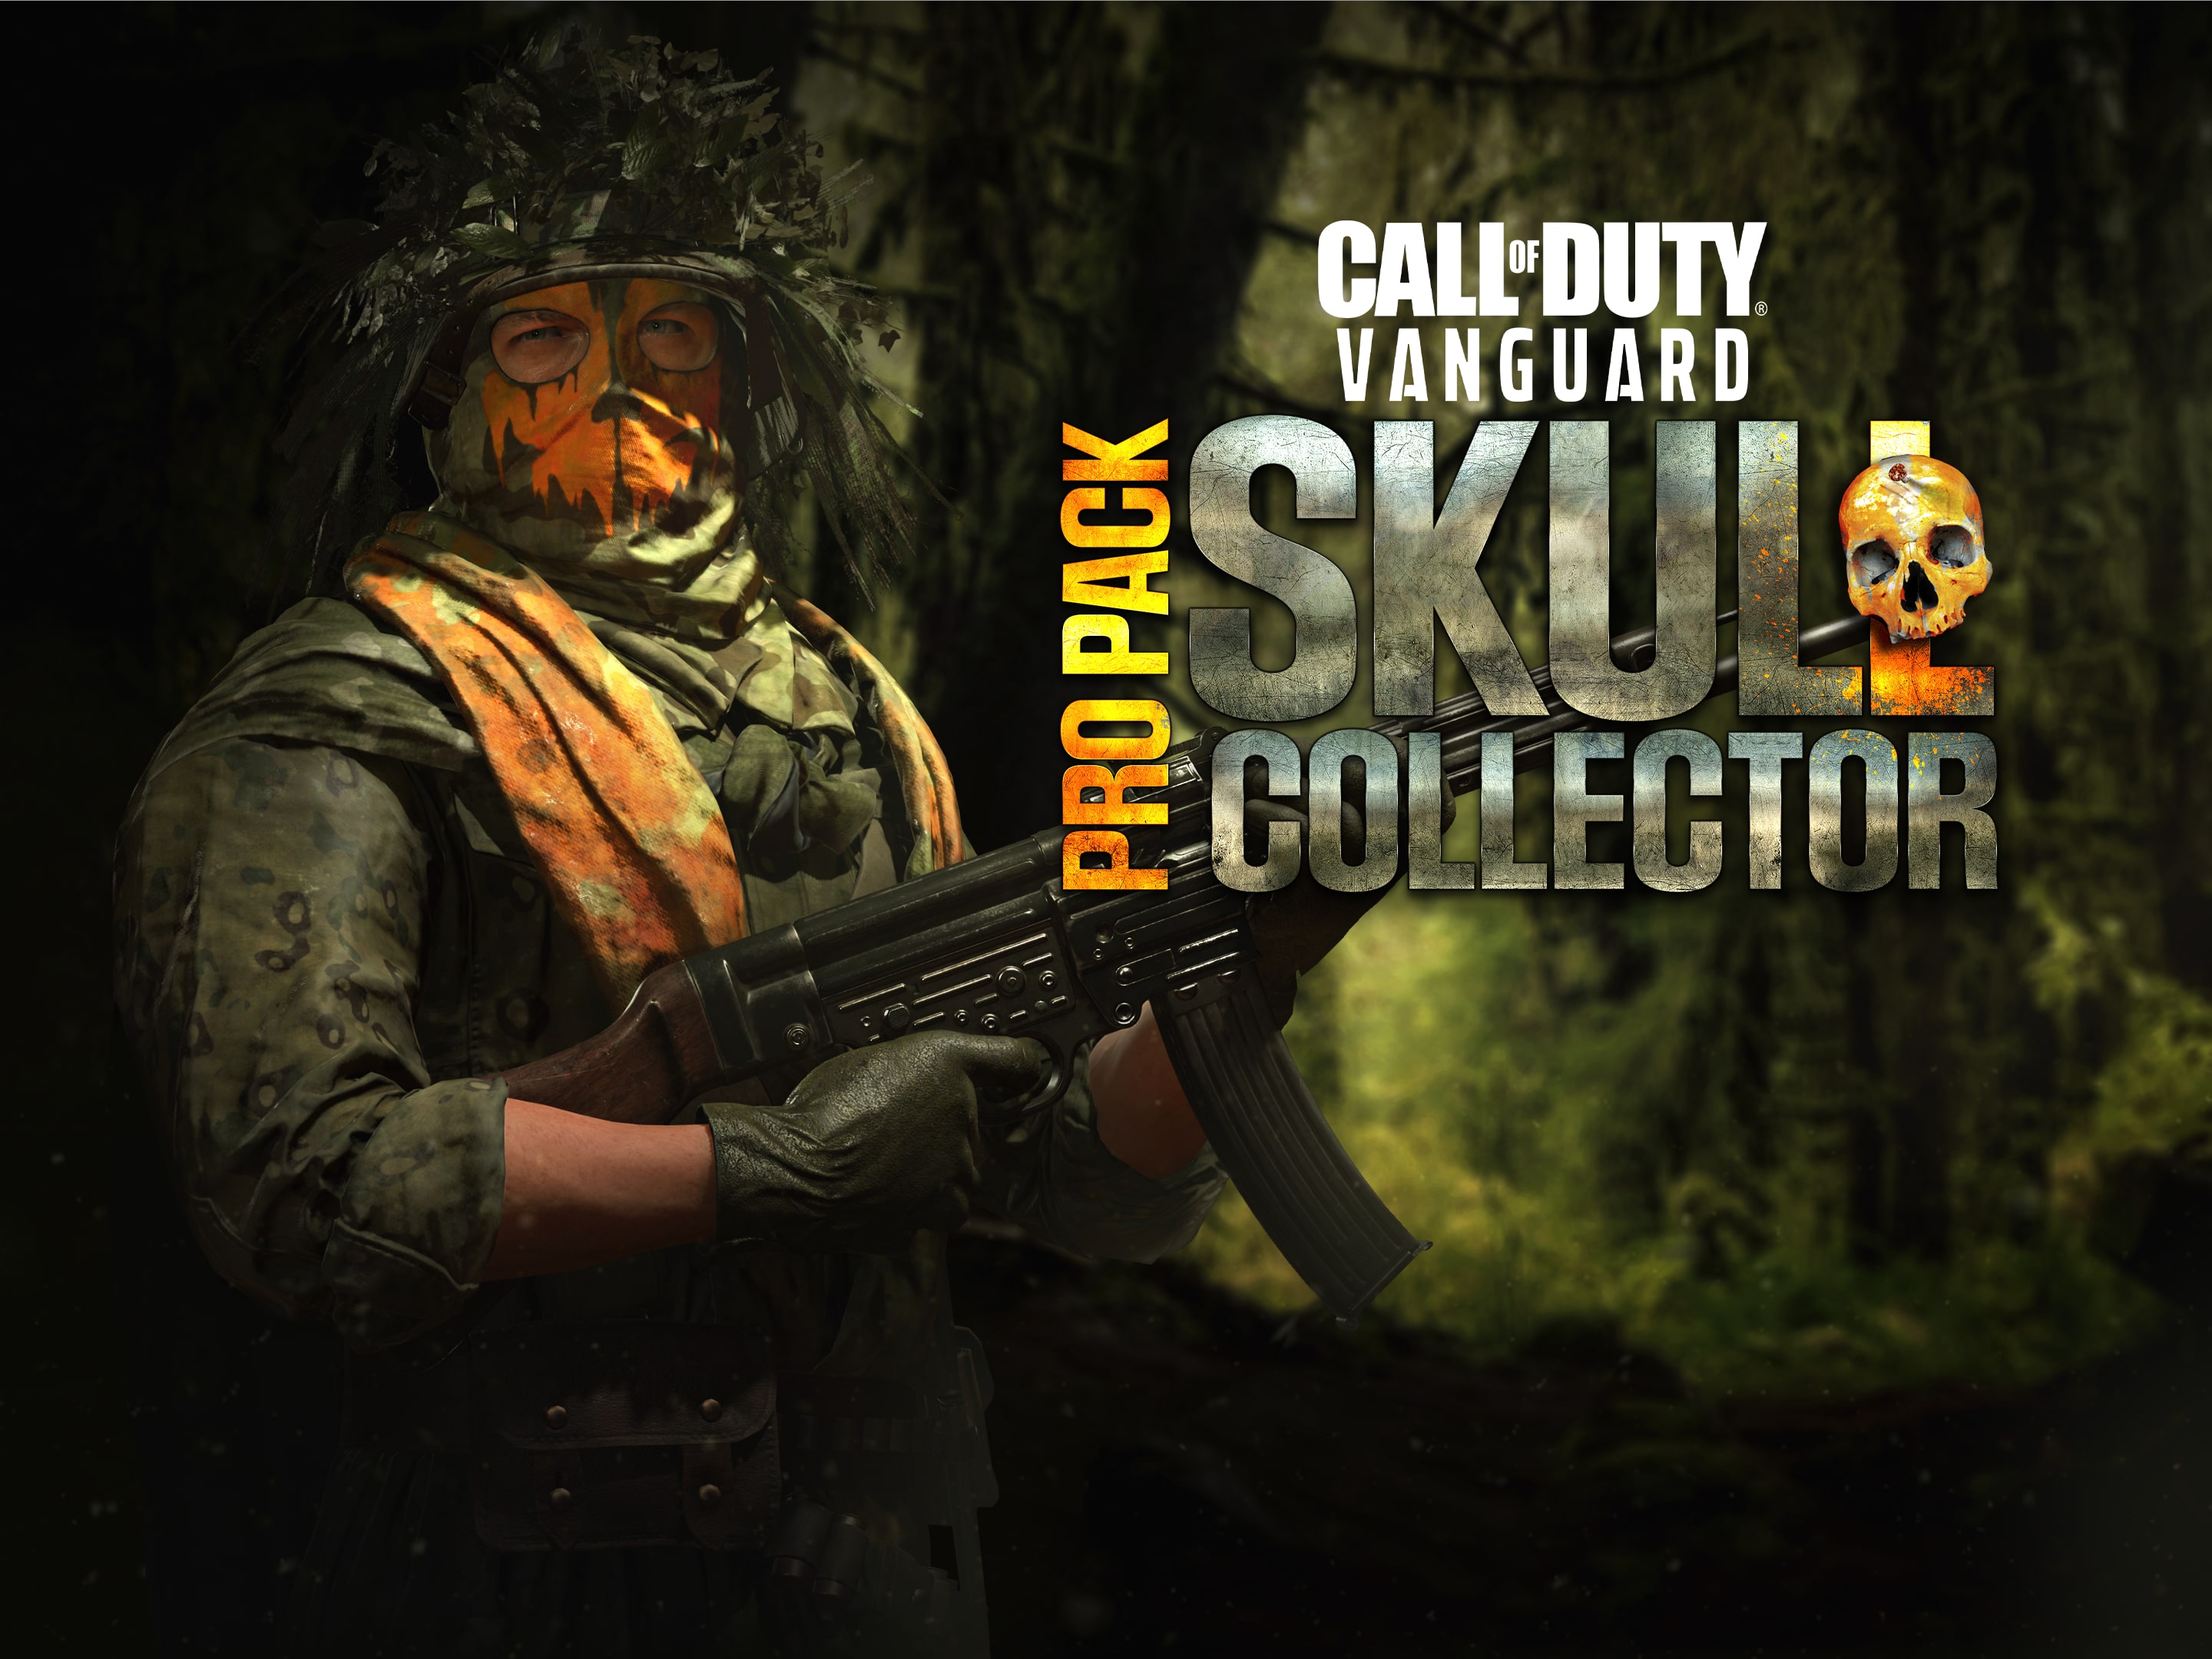 Call of Duty®: Vanguard - Skull Collector: Pro Pack no Steam